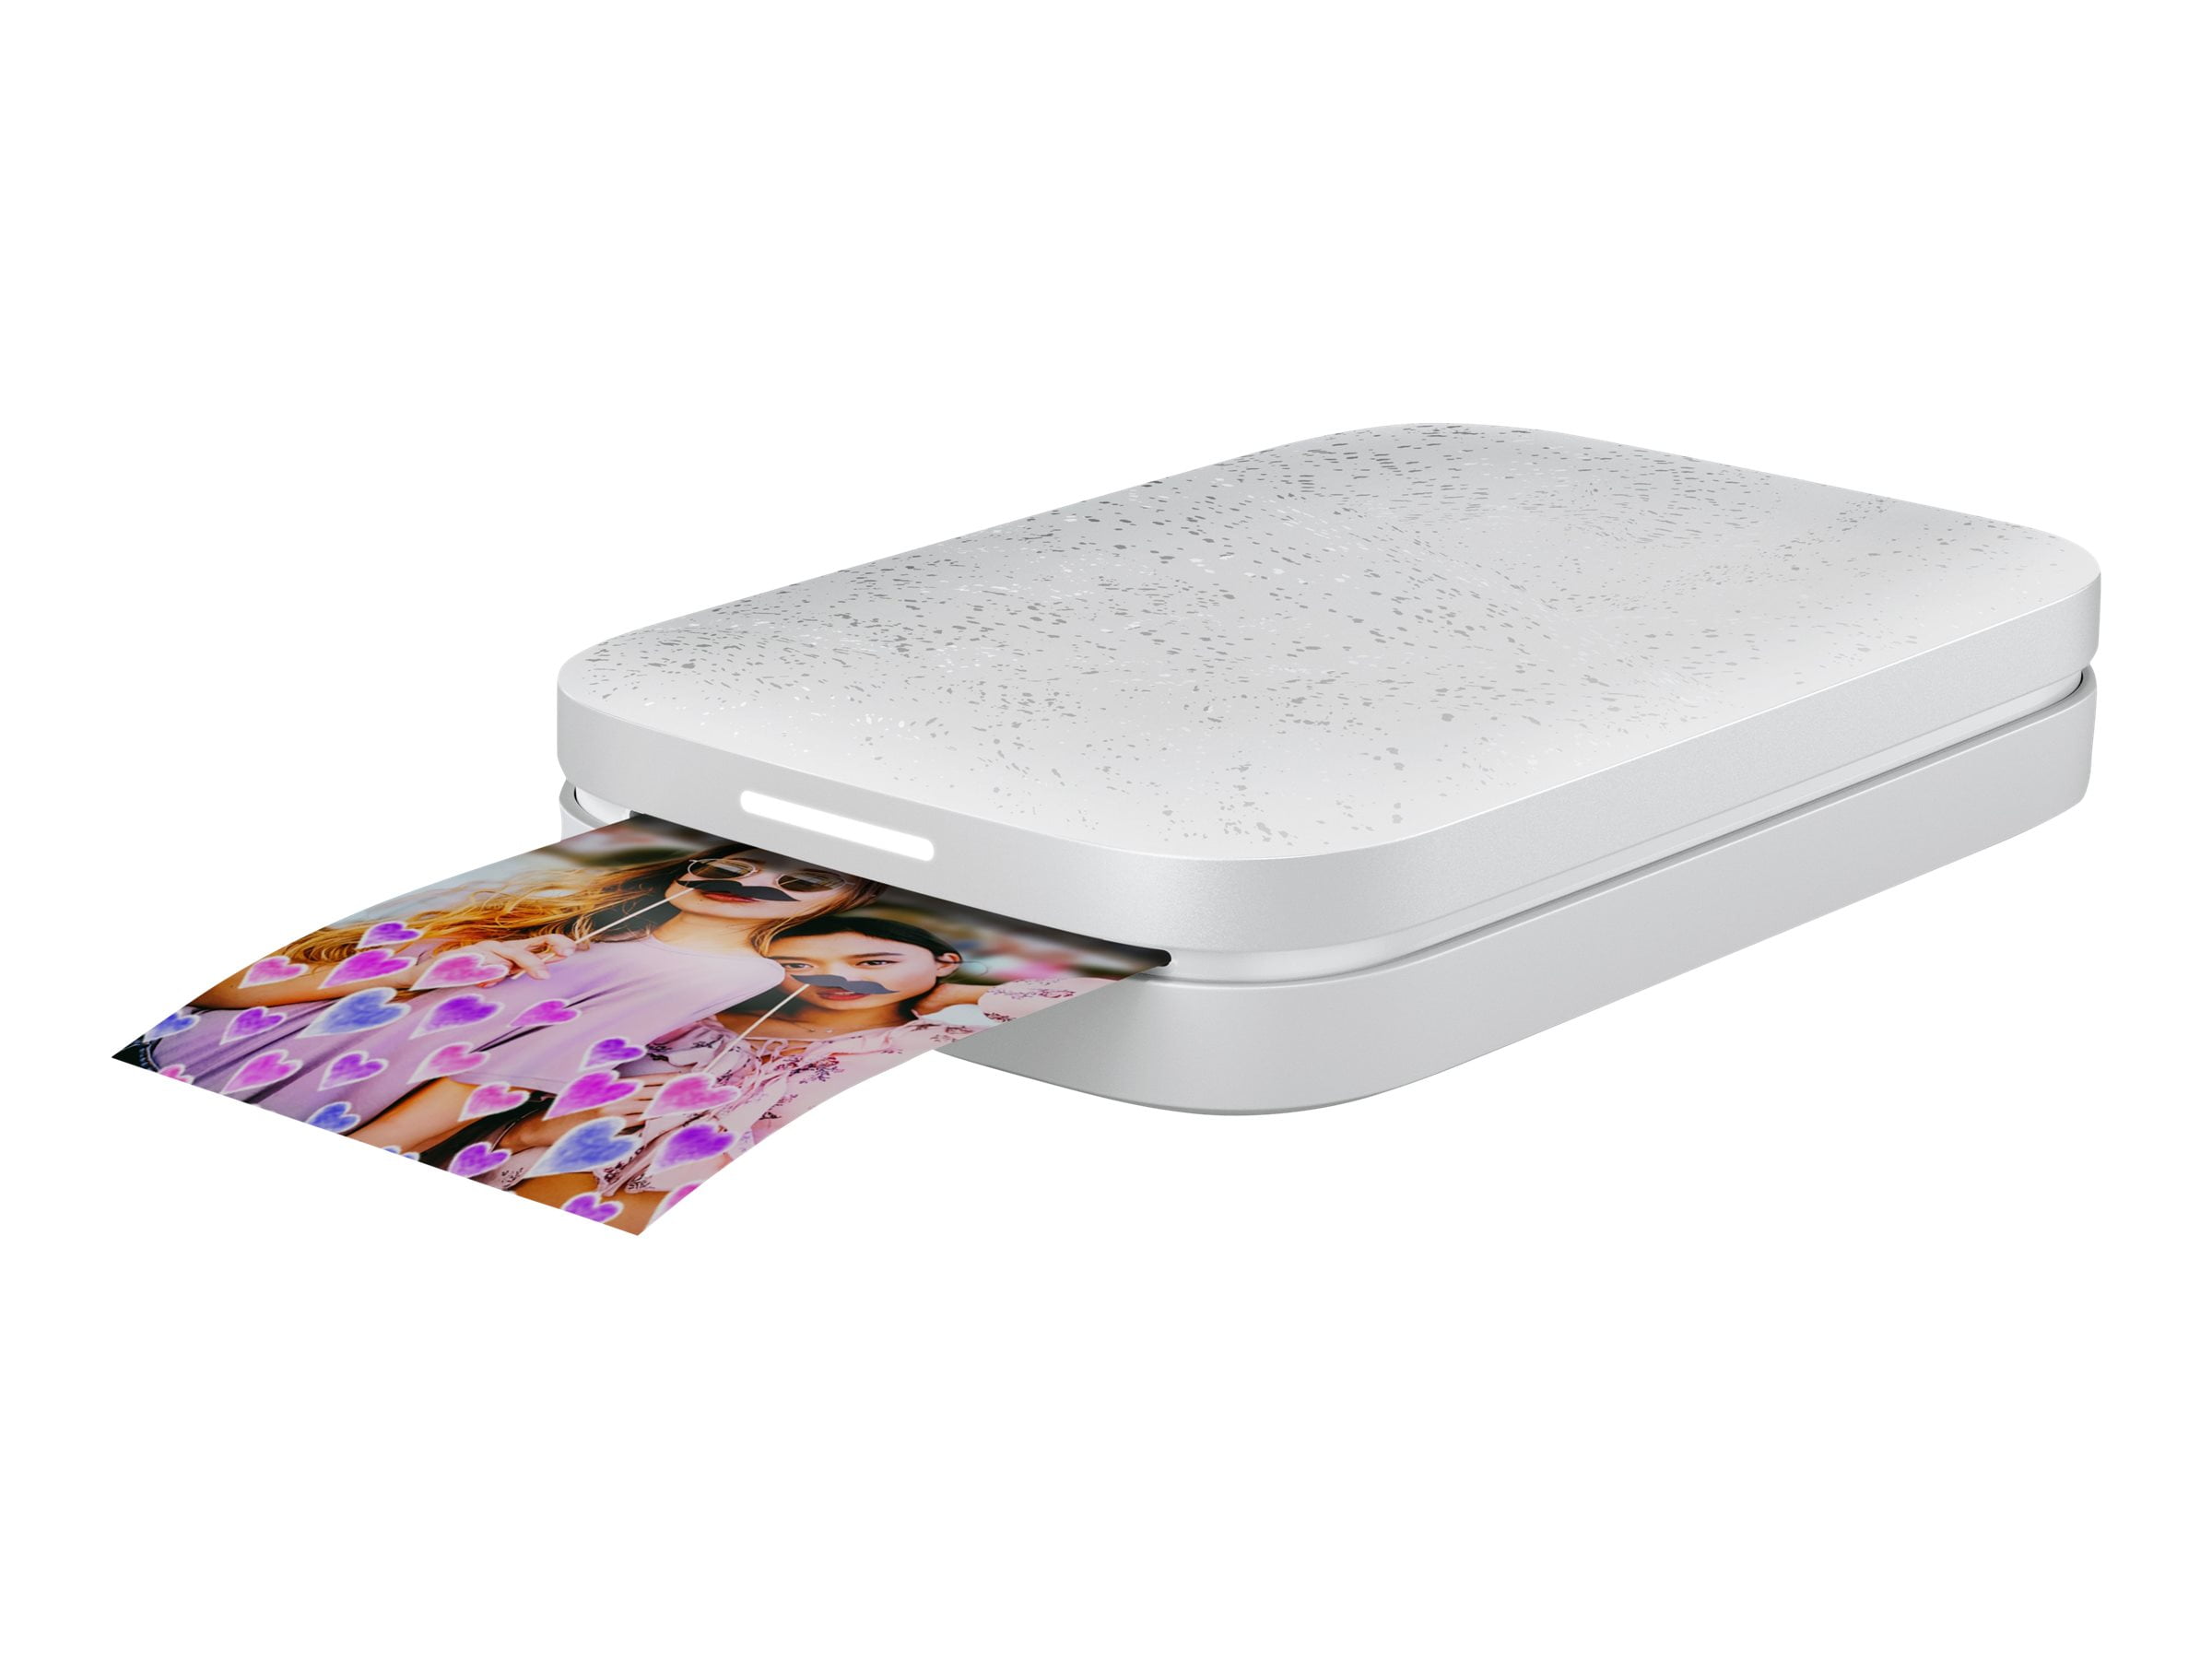 HP Sprocket Portable Photo Printer (Luna White) – Instantly Print 2x3”  Sticky-backed Photos from Your Phone 